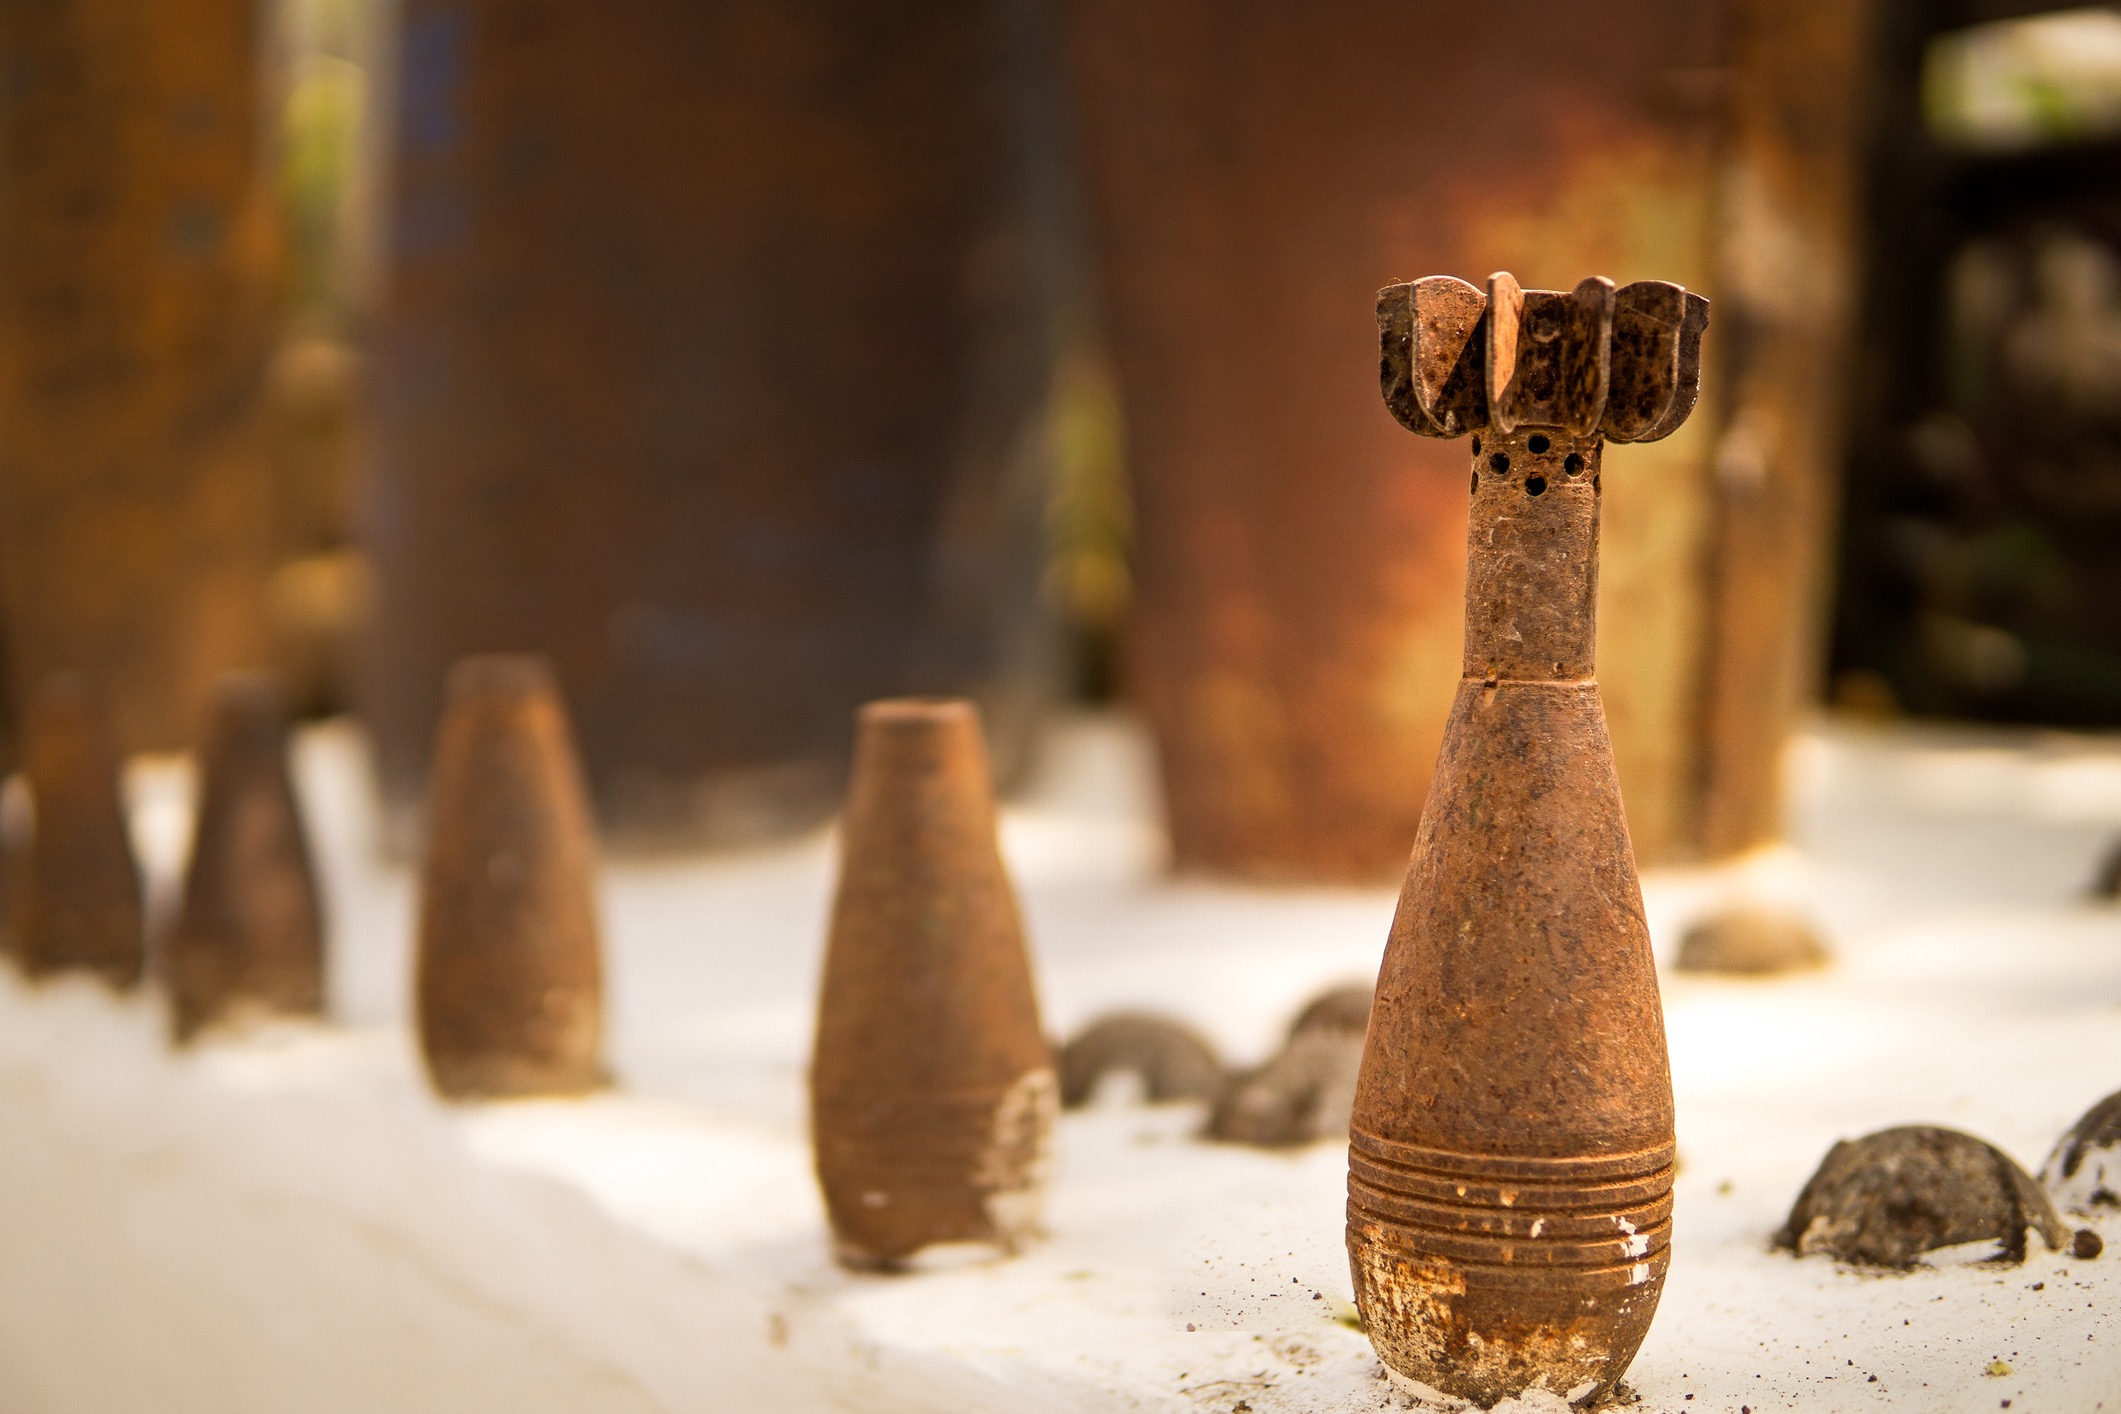 Unexploded ordnance from cluster bombs on display in Laos. (Getty)